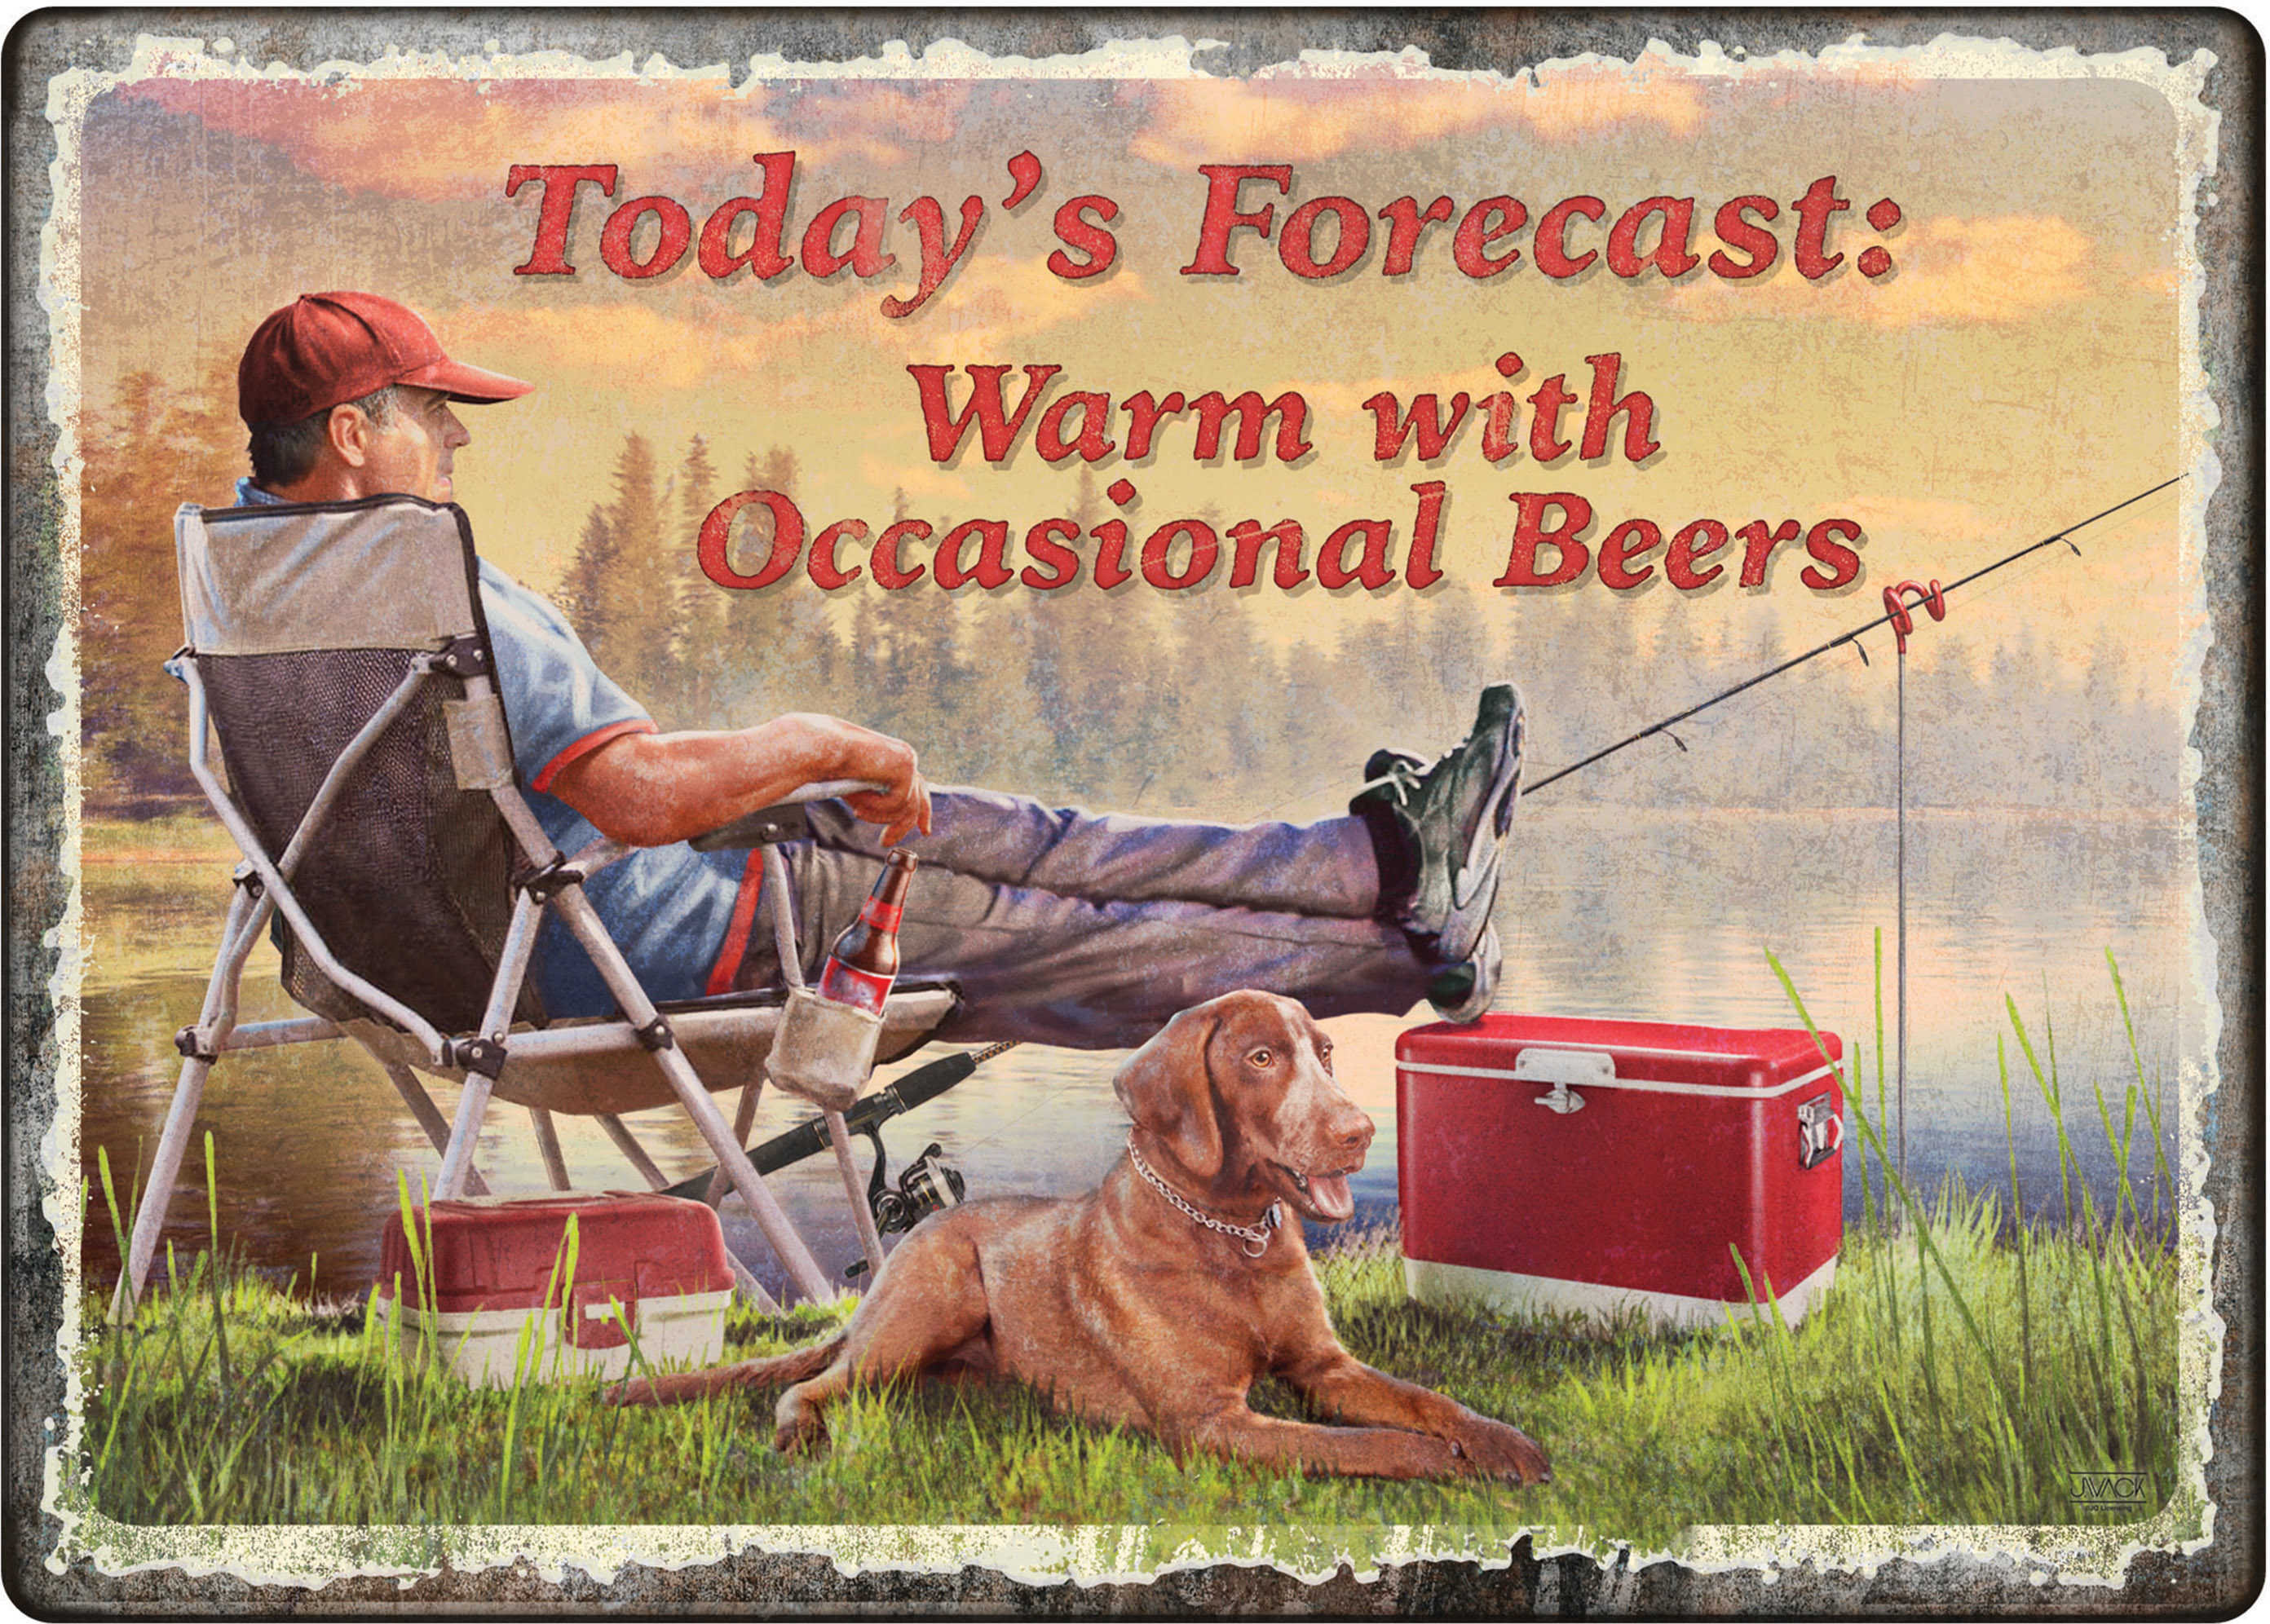 Rivers Edge Products 12" x 17" Tin Sign Warm Ocasional Beers Md: 1452